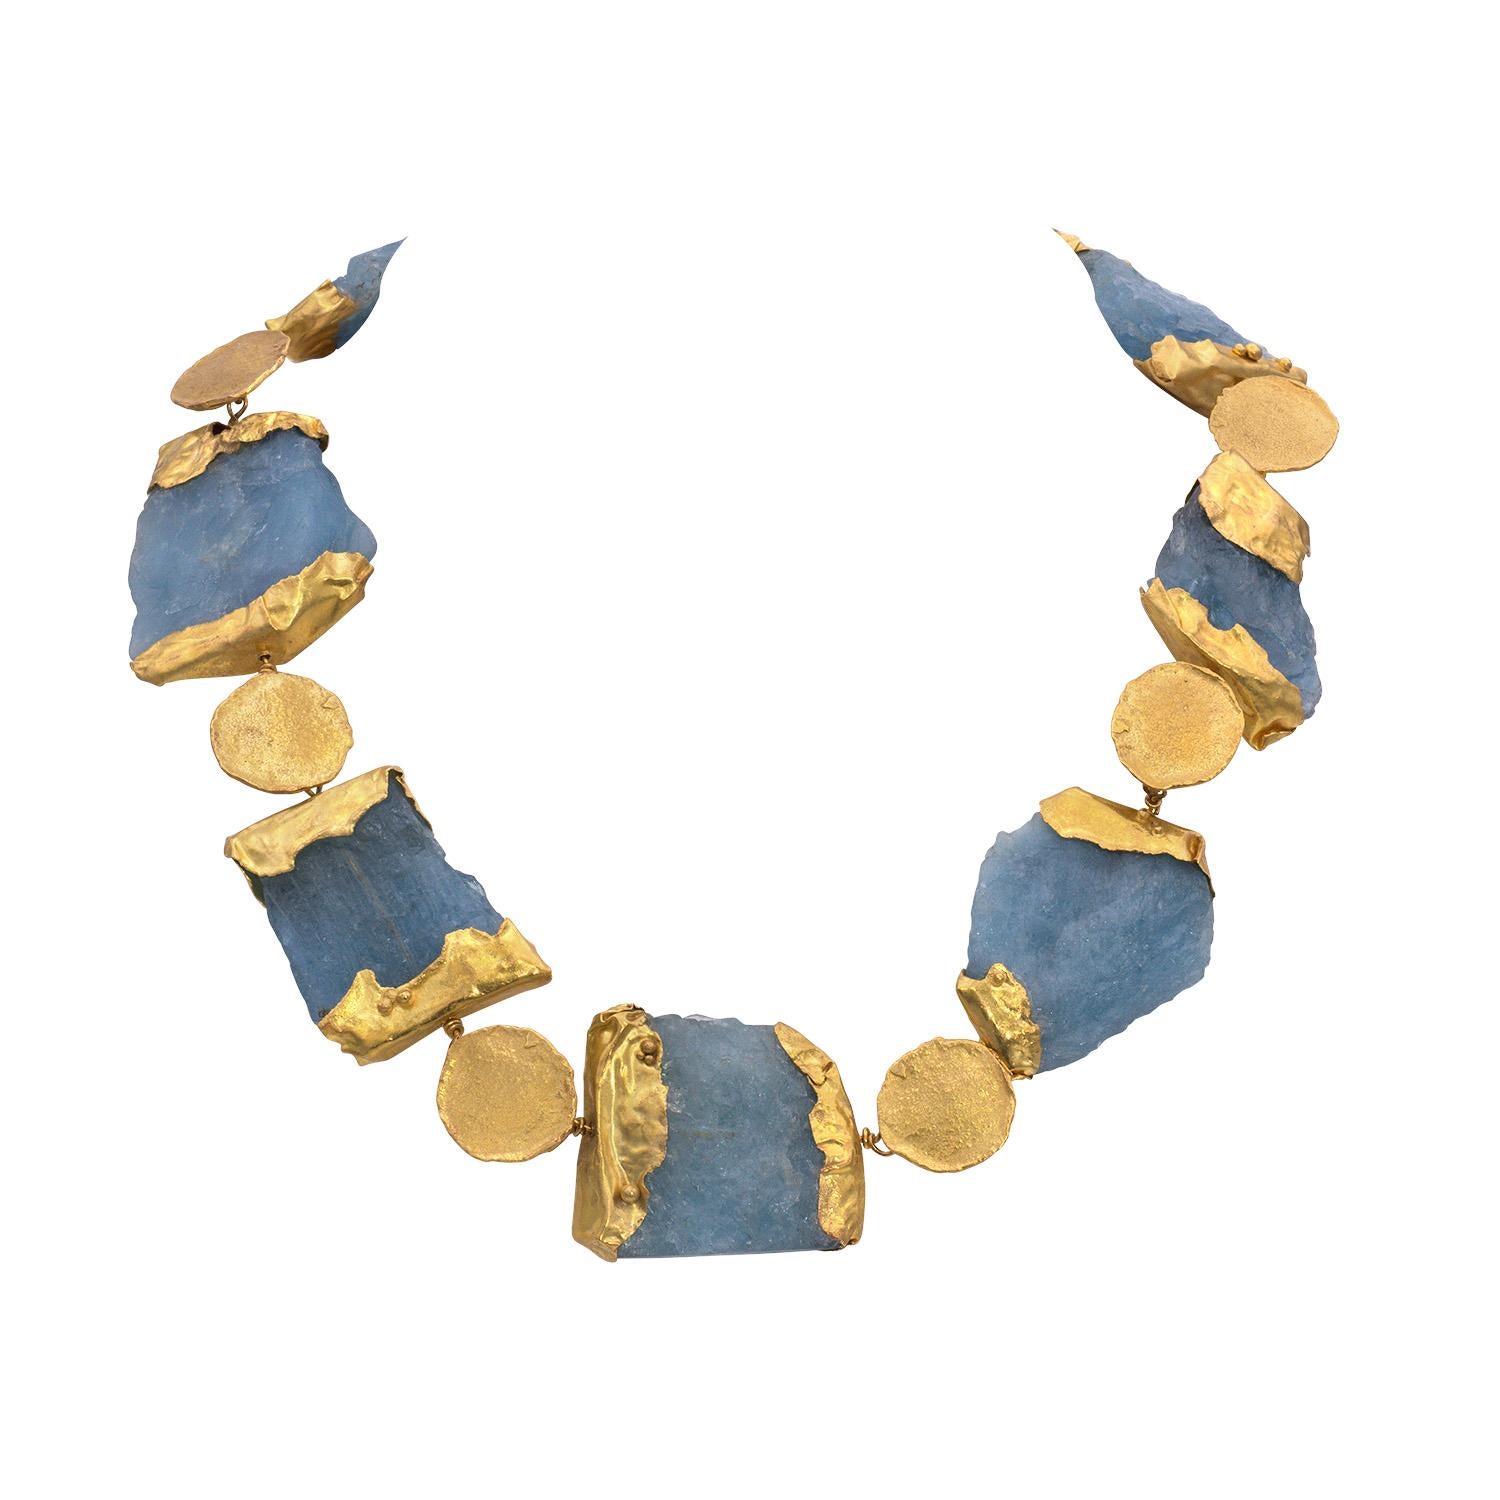 Designed as a series of rough aquamarine crystals embellished with handmade 22K gold caps. This necklace was entirely handmade in New York City by the studio jeweler Tess Sholom. The necklace looks ancient and rich, as if it was excavated at an